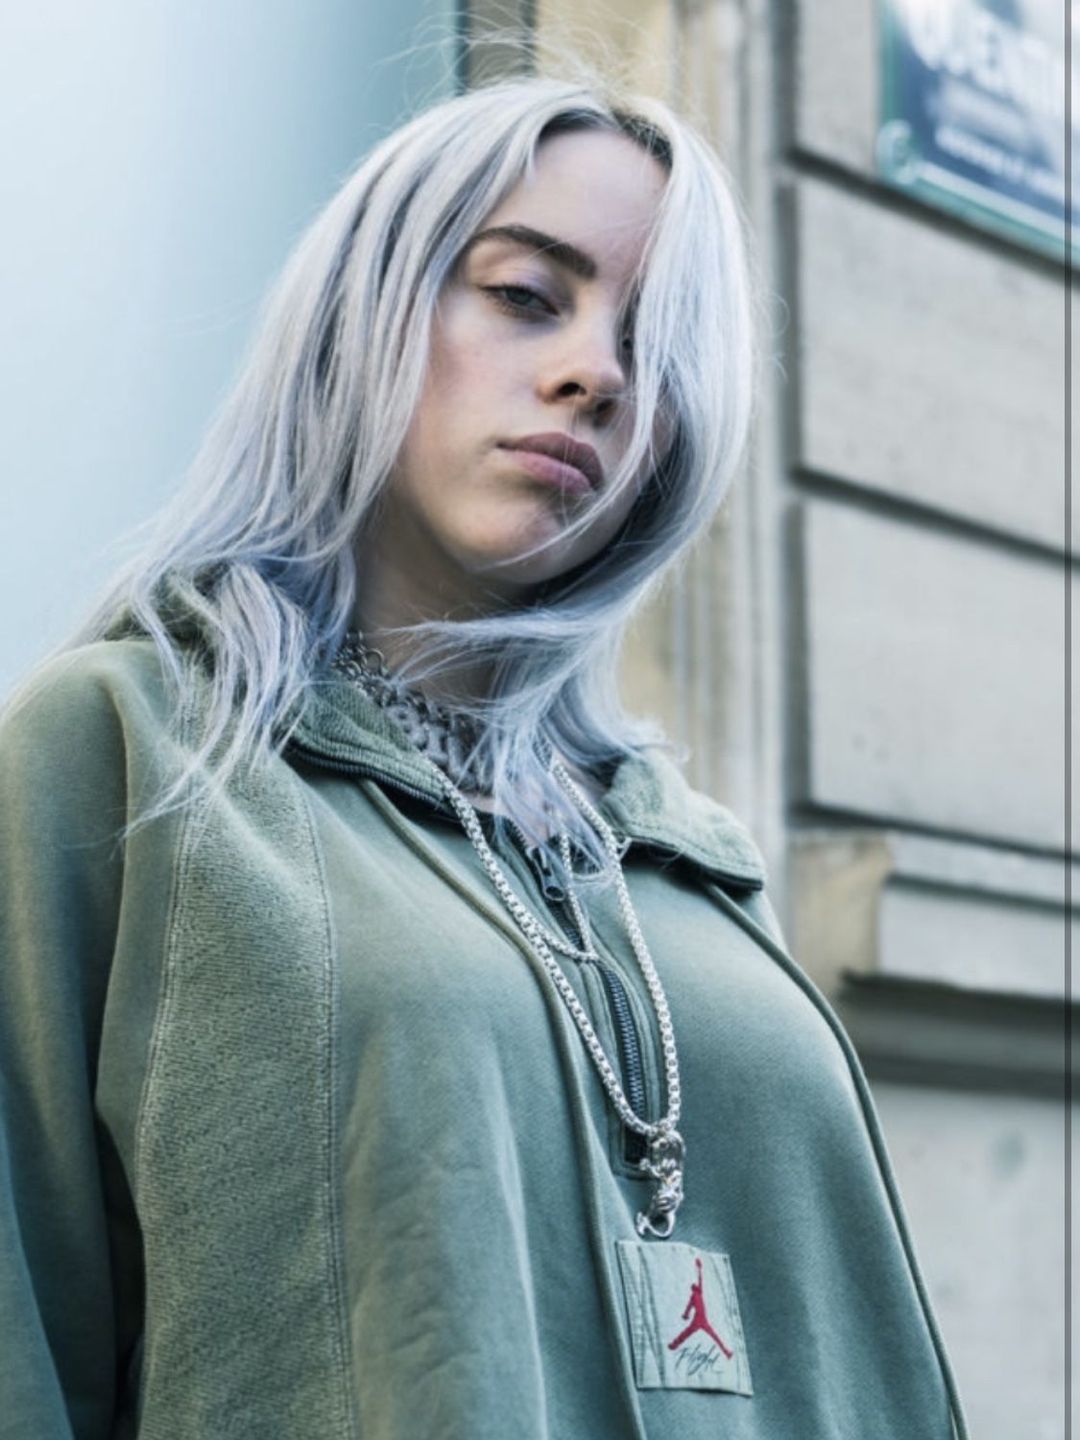 Billie Eilish who is her father